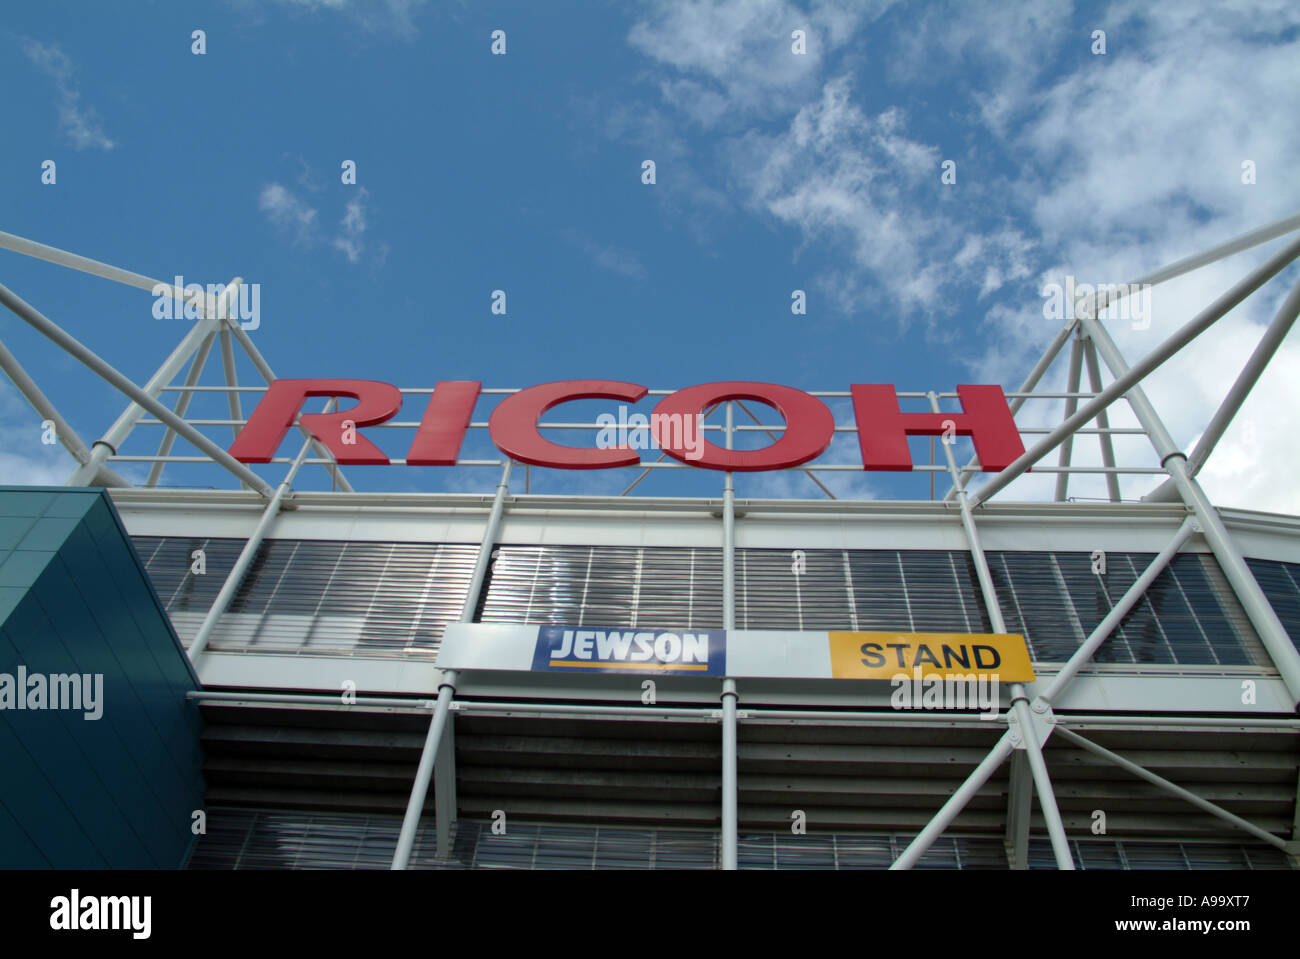 Ricoh Arena home of Coventry City Stock Photo